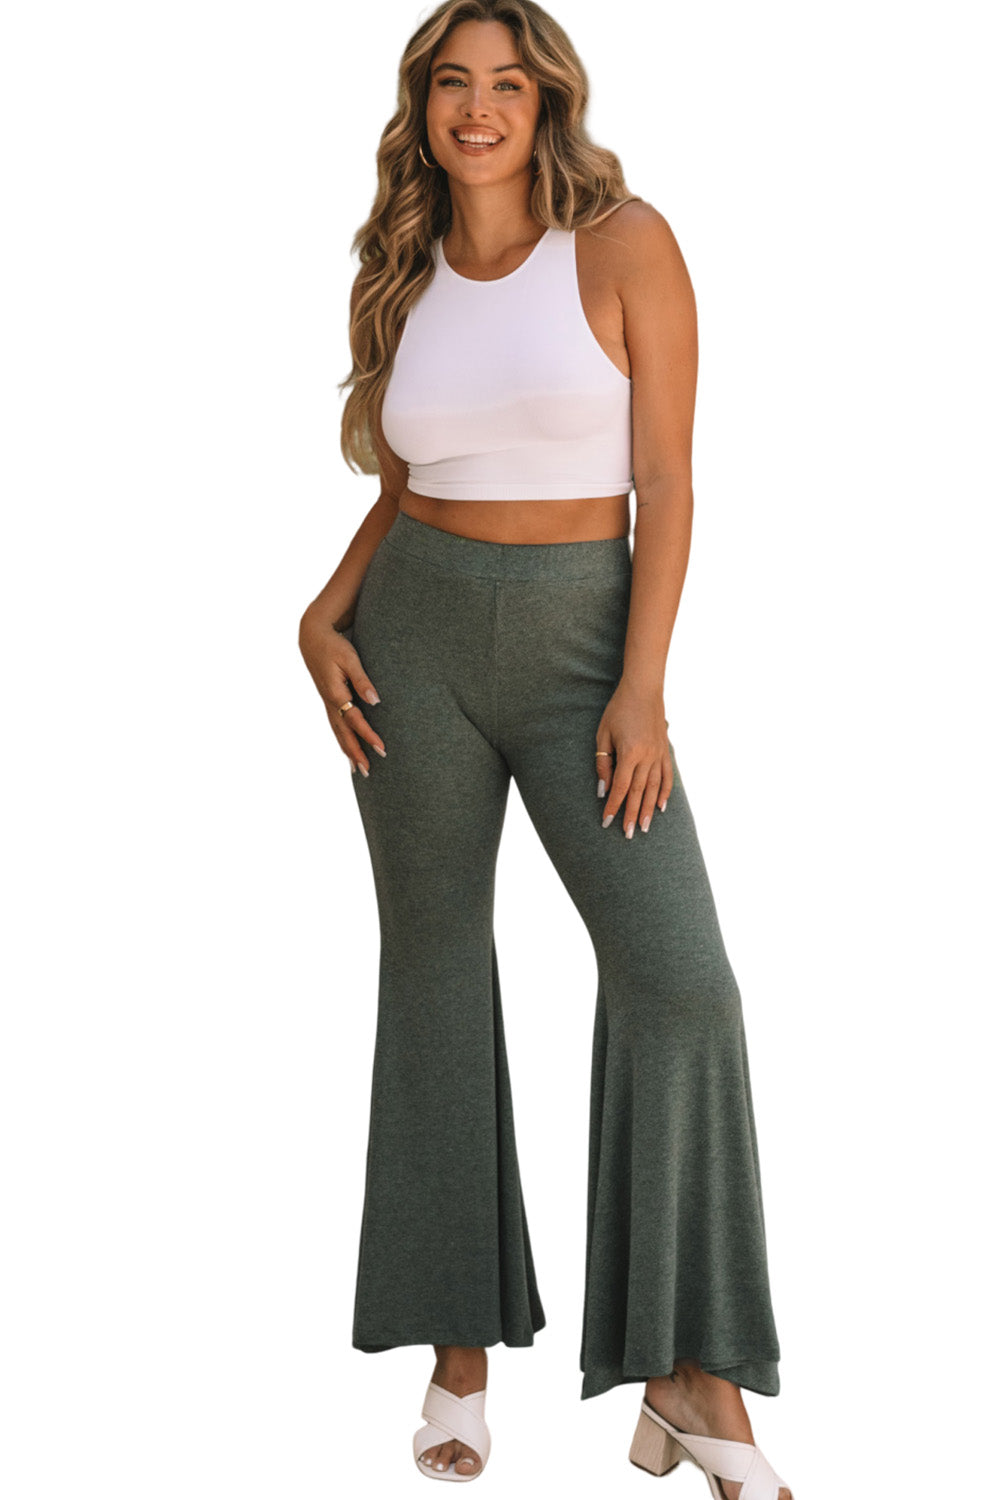 Grüne Fit-and-Flare-Hose mit hoher Taille